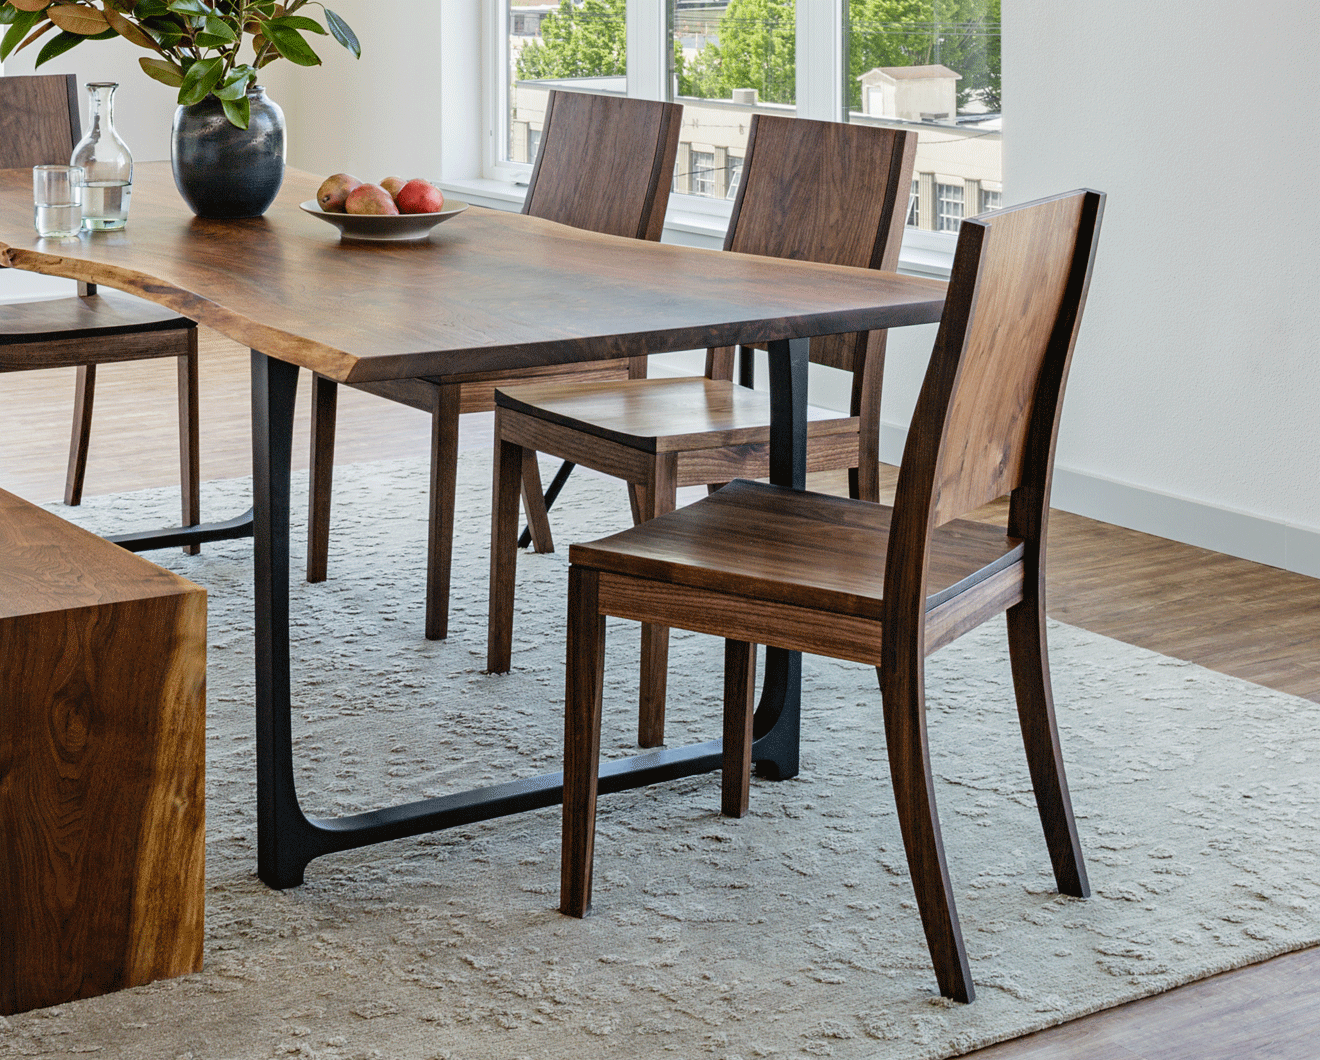 Studio Dining Chair in Eastern Walnut with Live Edge Dining Table